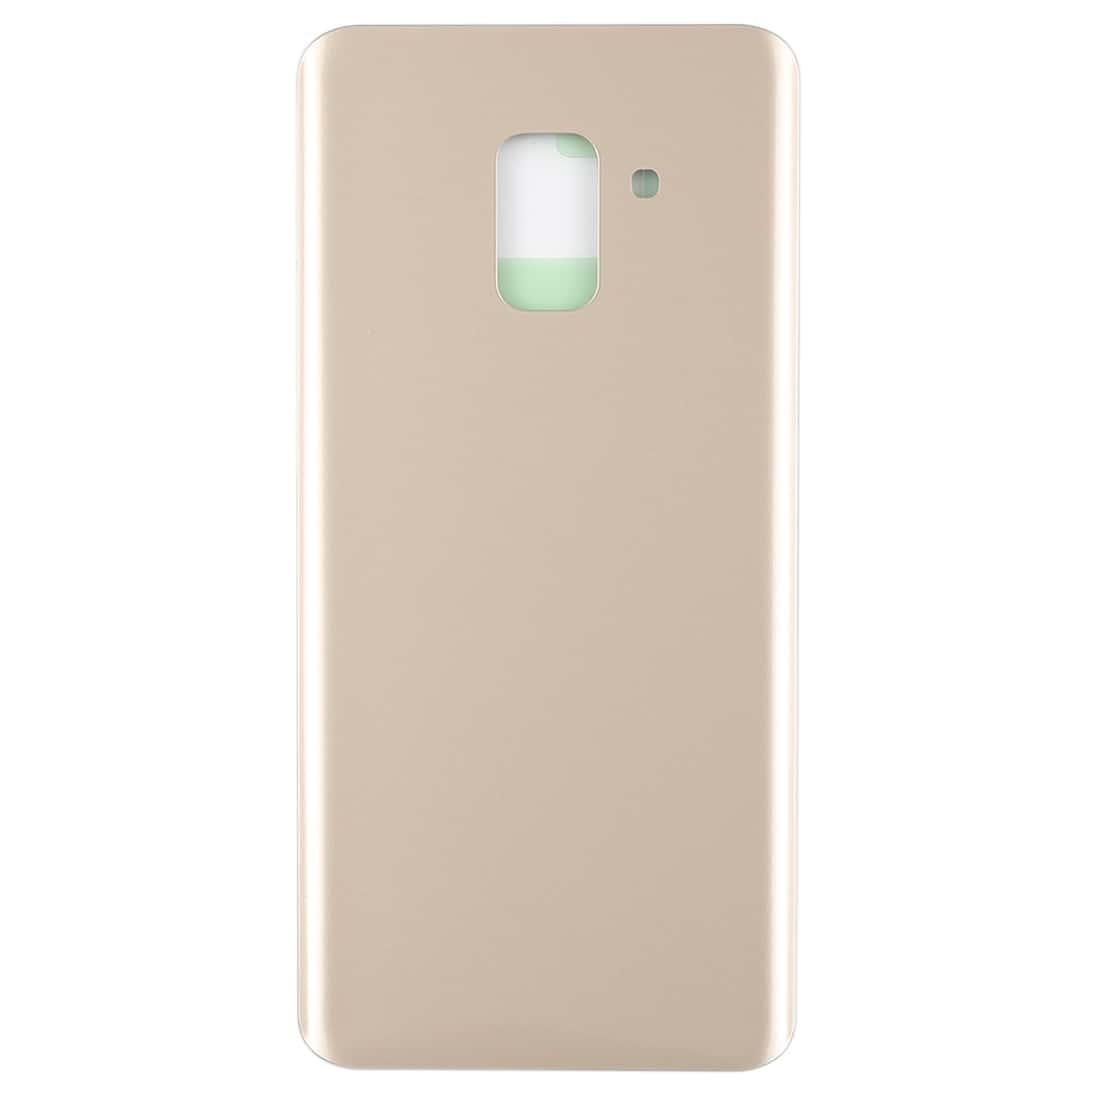 Back Glass Panel for  Samsung Galaxy A8 2018 A530 Gold